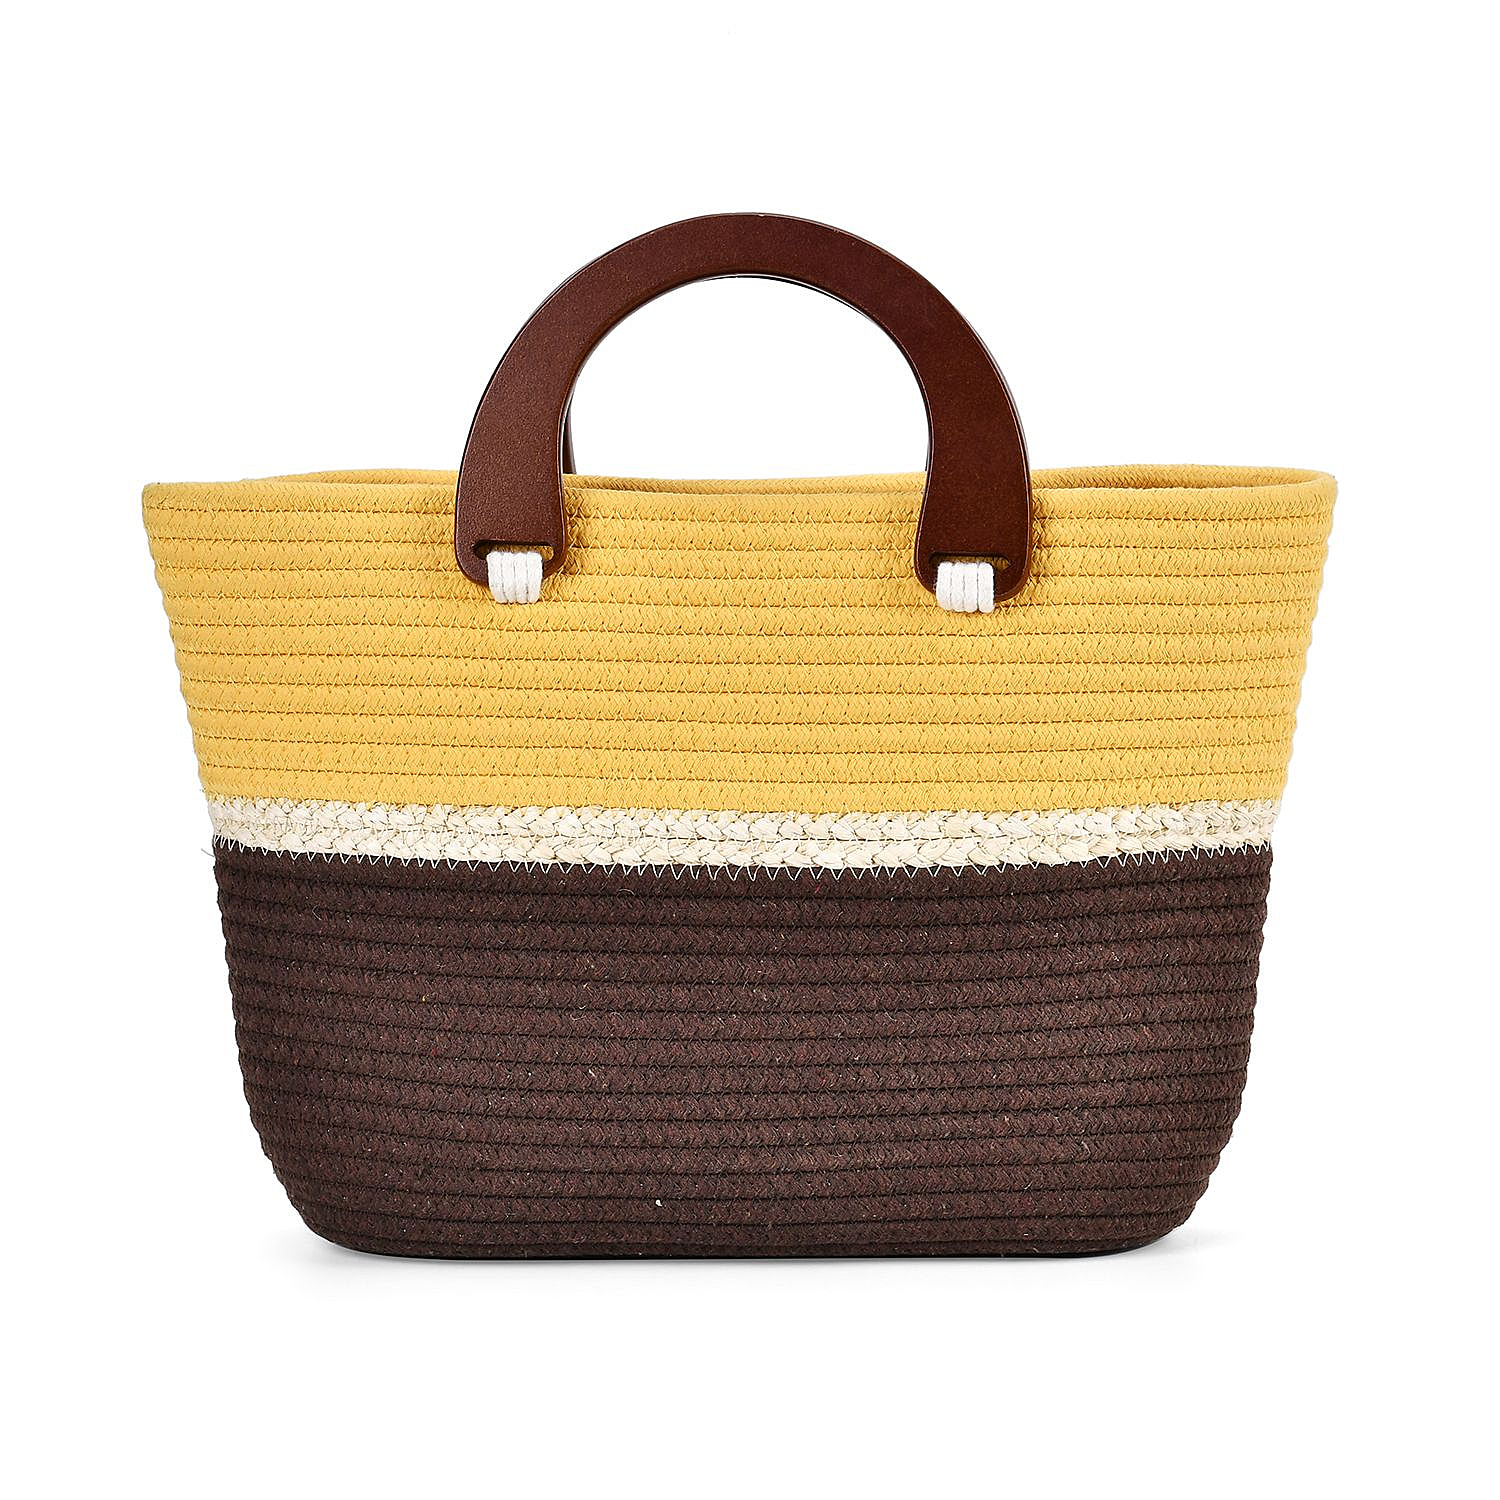 100% Cotton Knitted Handbag with Wooden Handle - Yellow & Brown